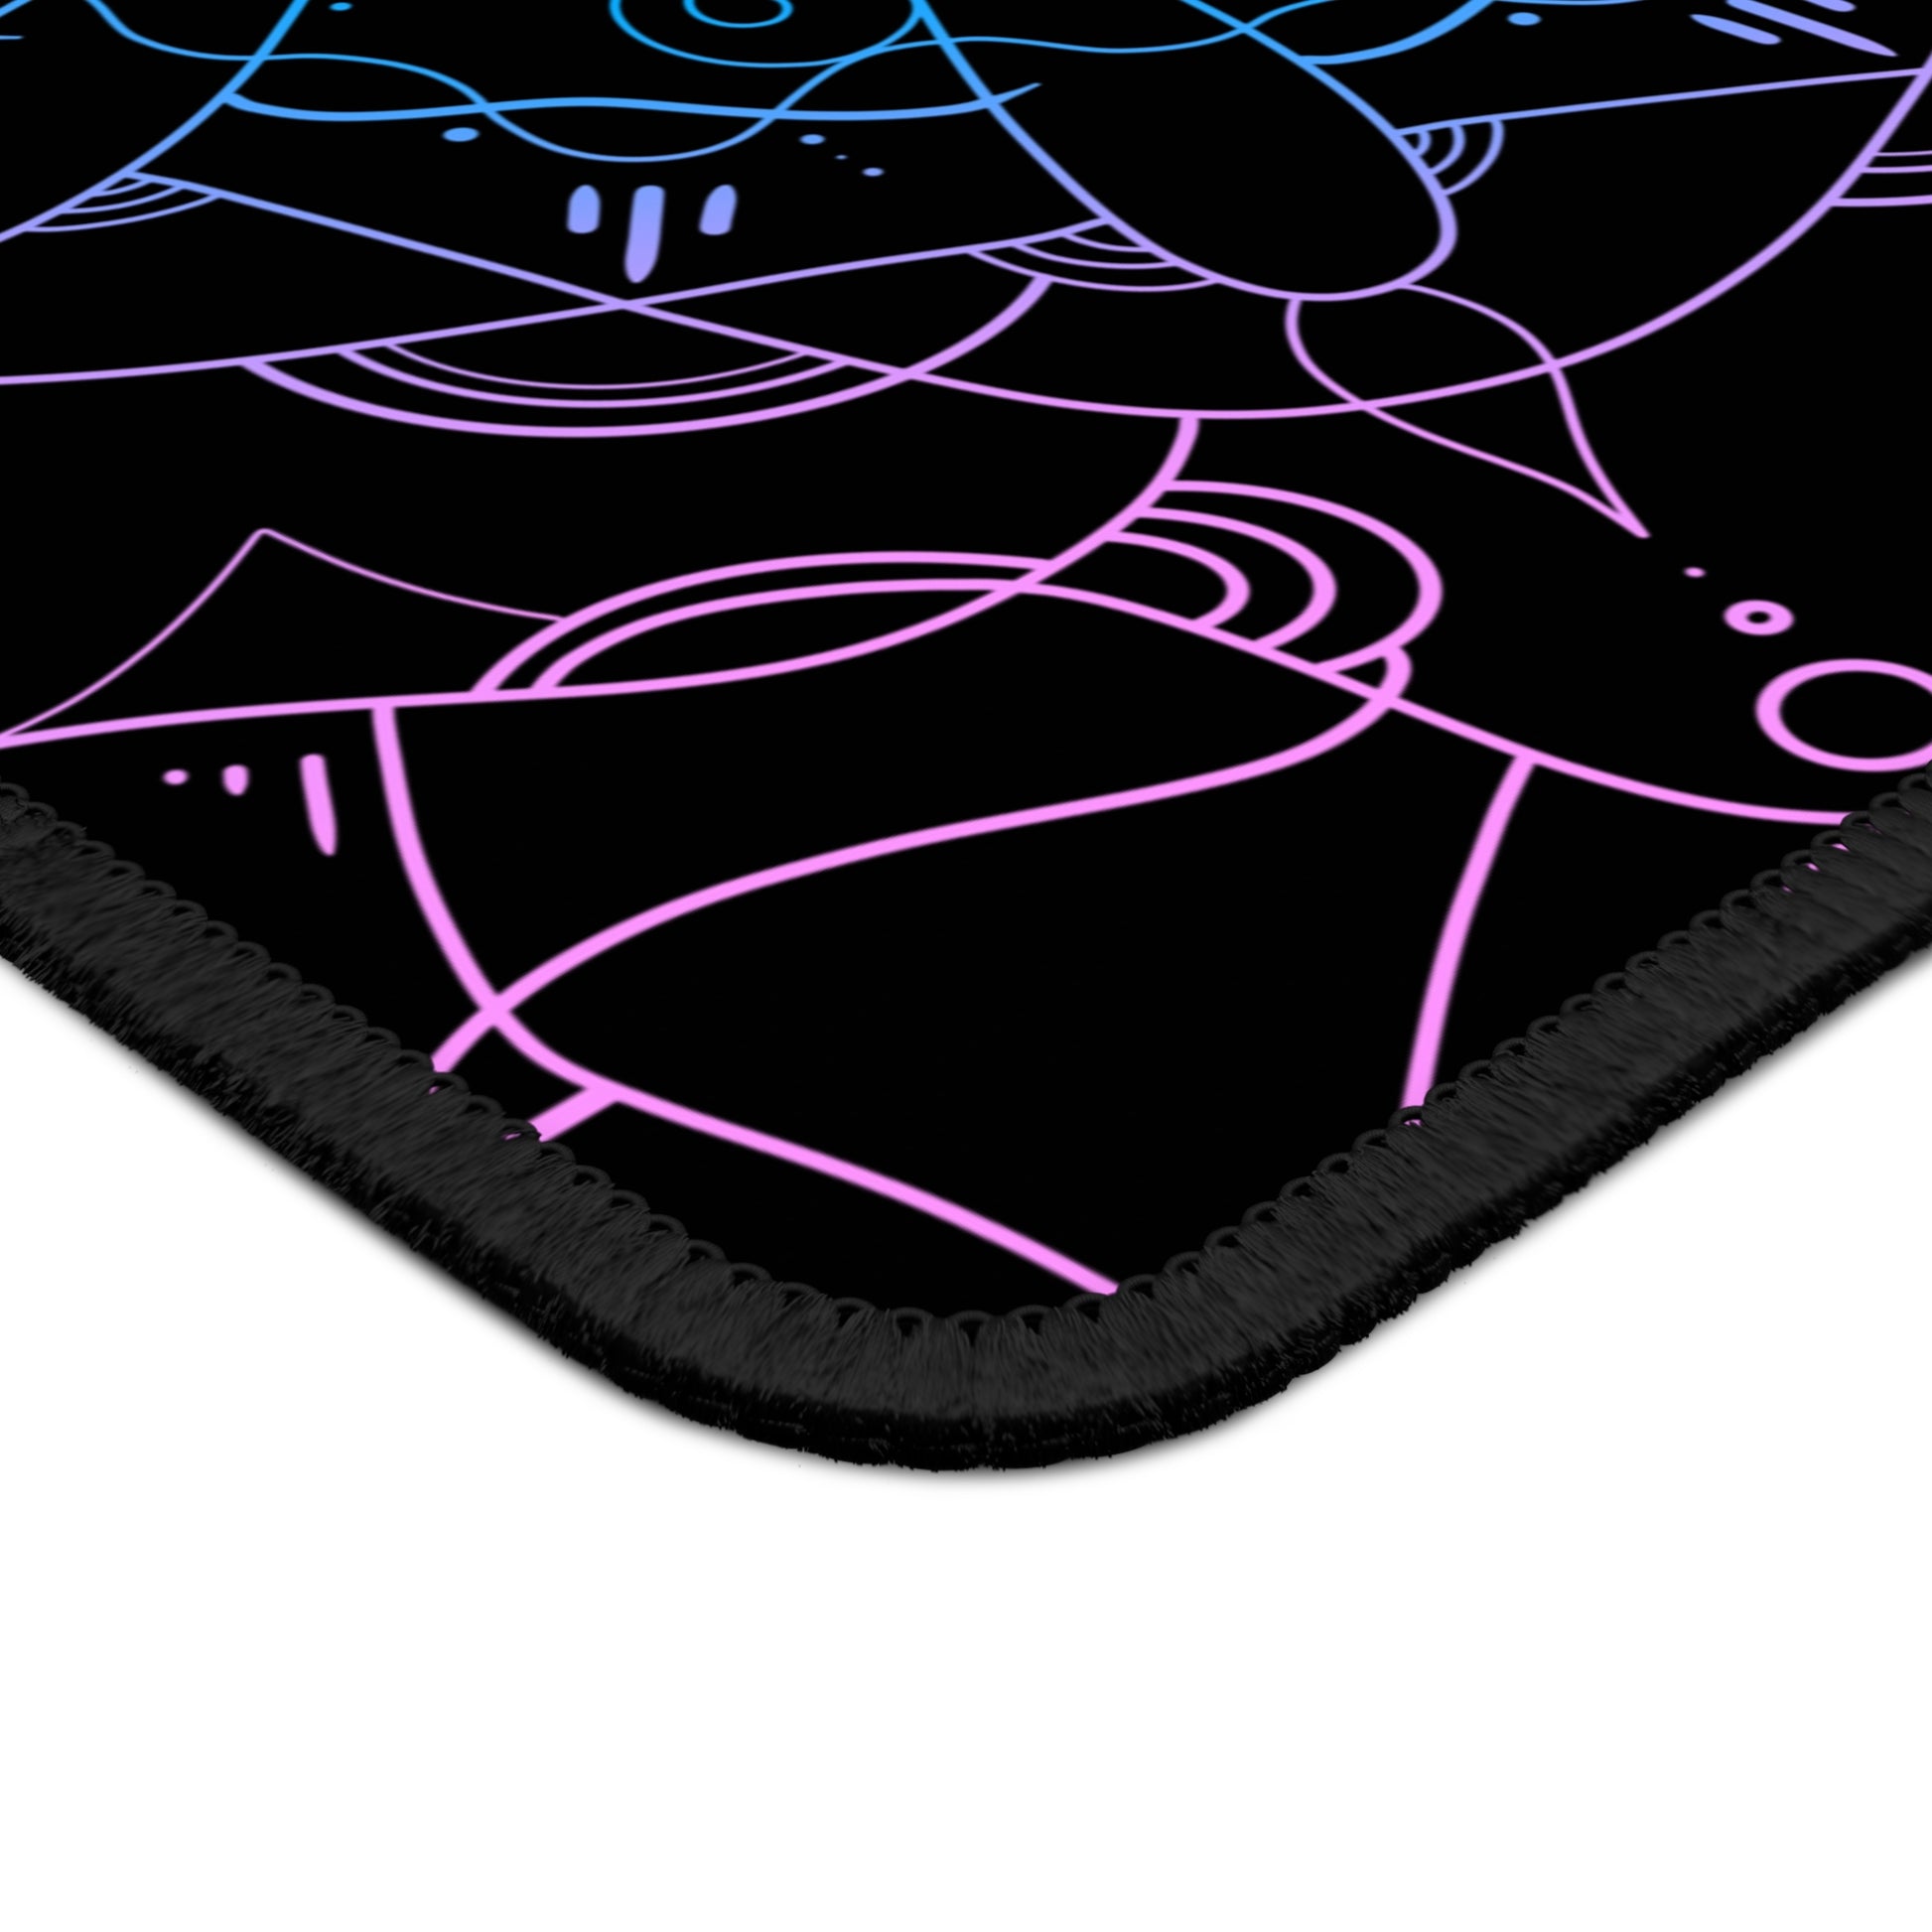 A gaming mouse pad with a pink and blue mandala pattern on a black background.